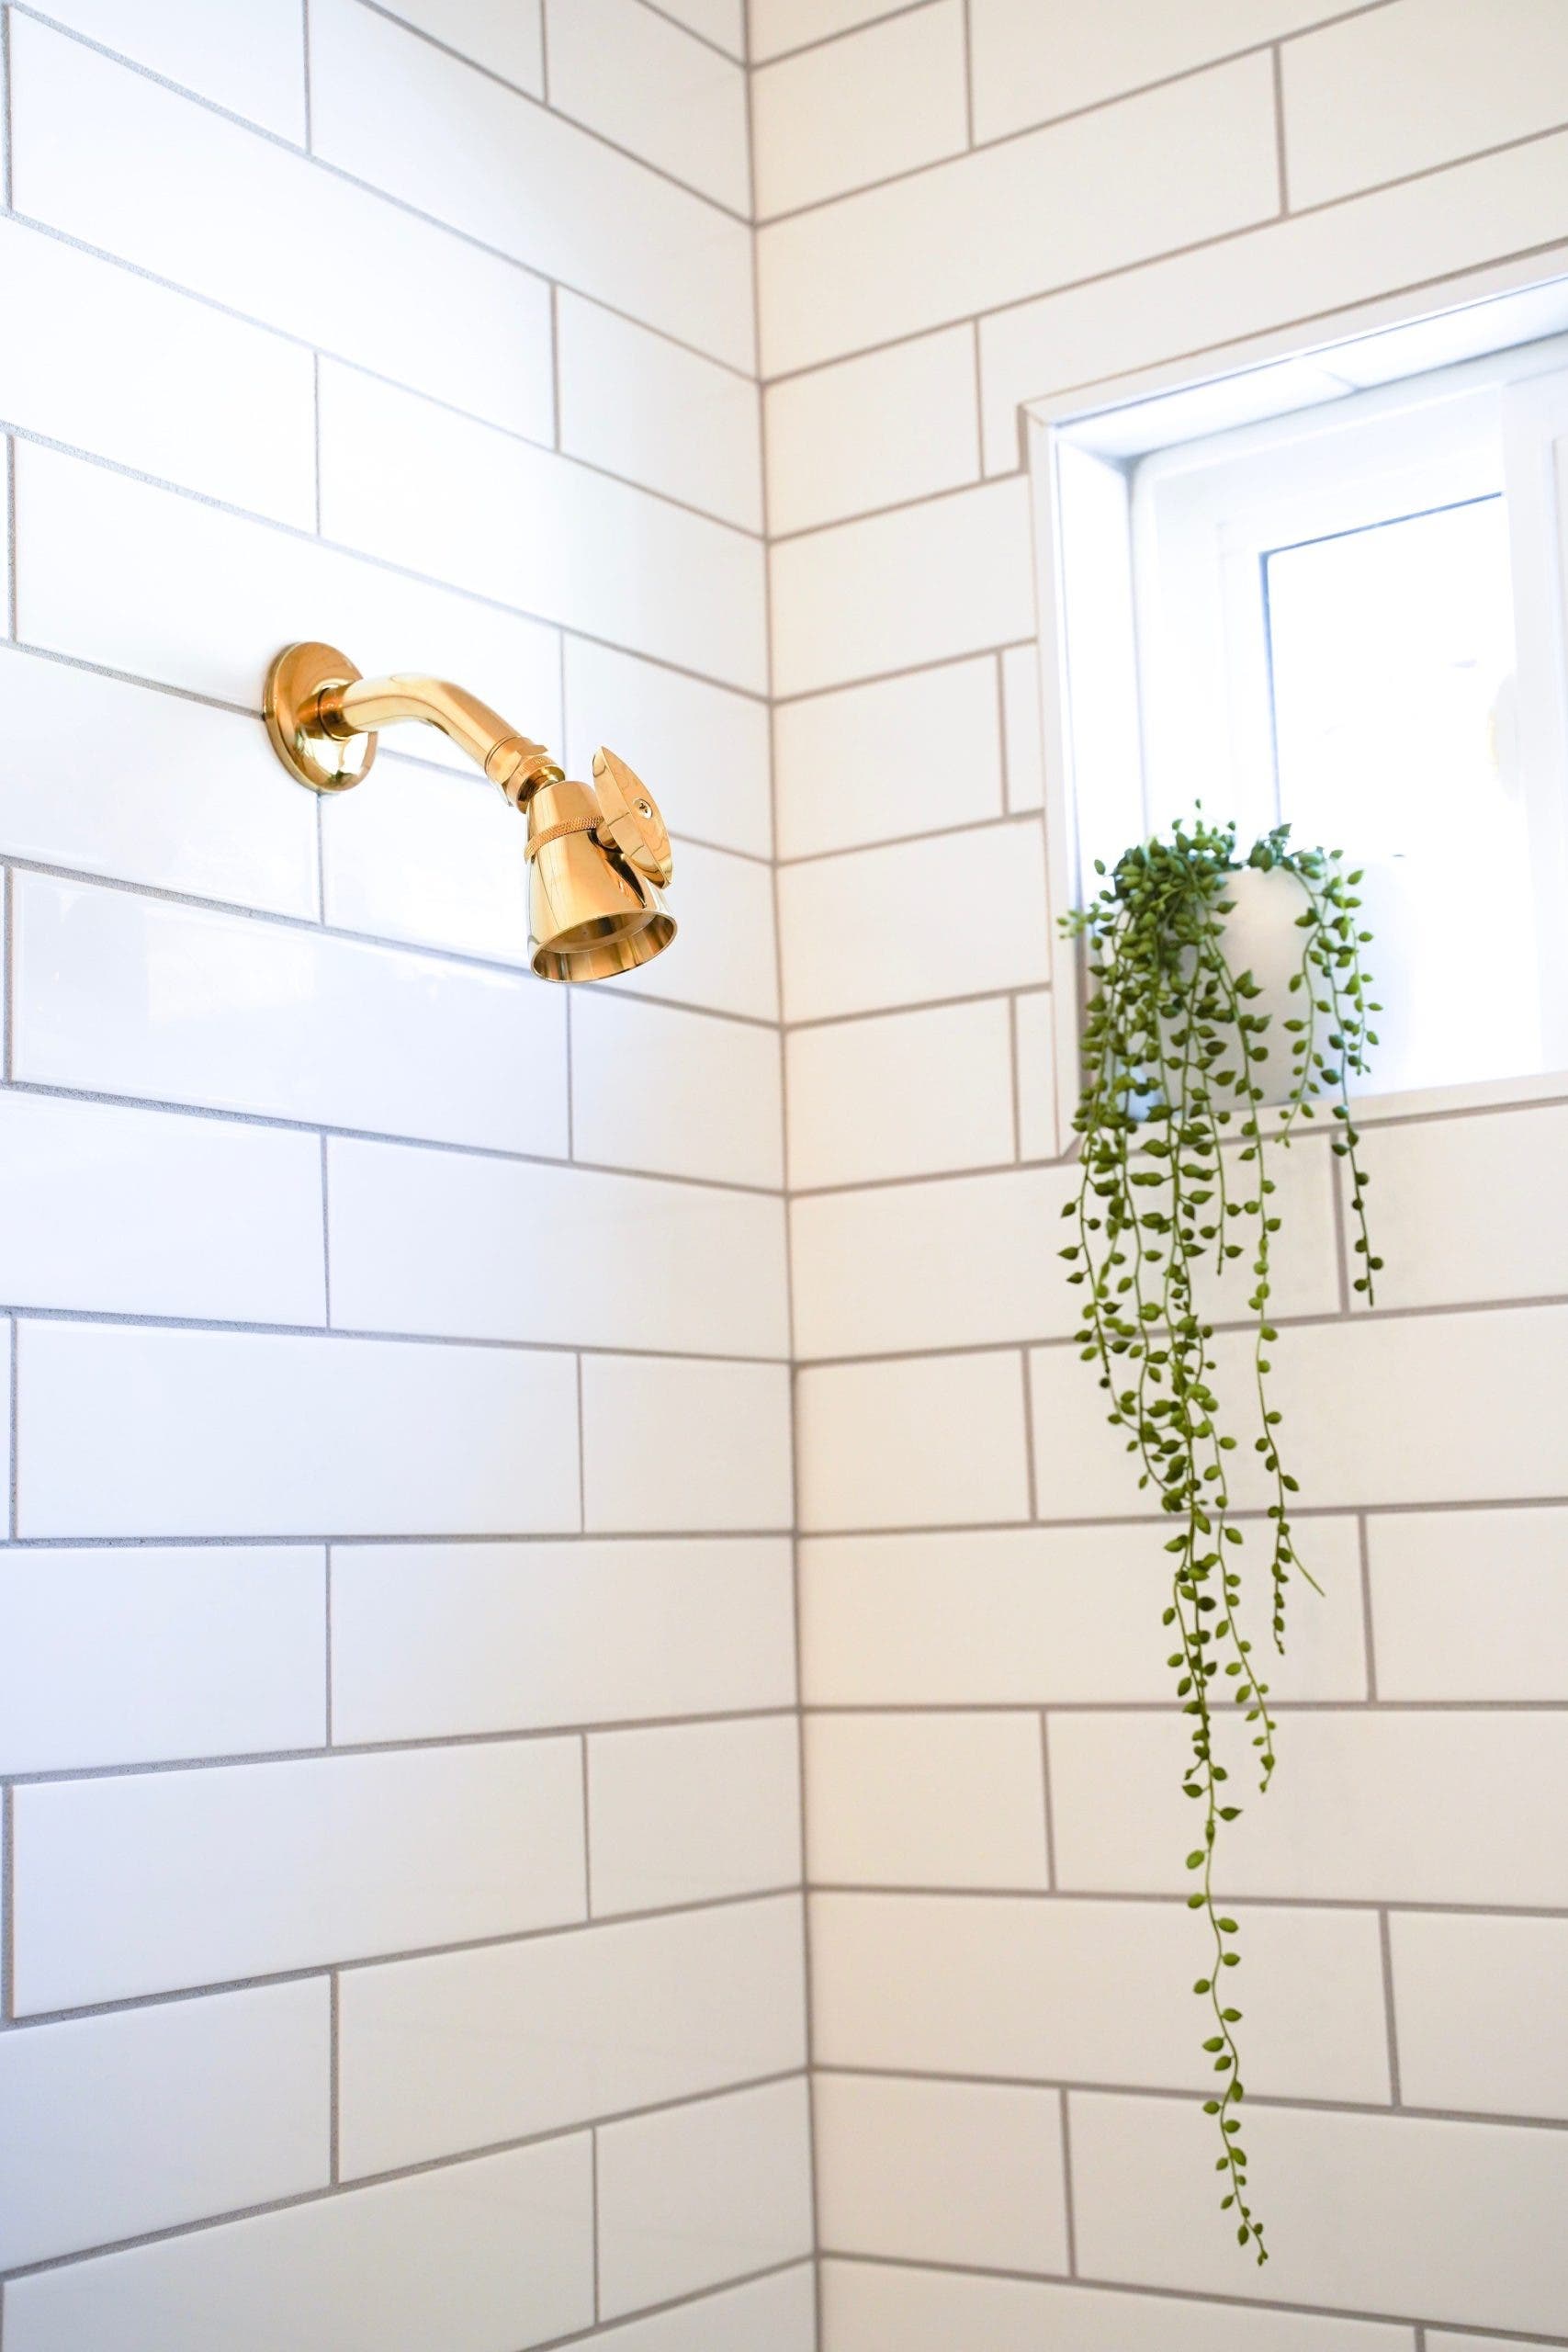 How to Upgrade a Basic Shower Faucet